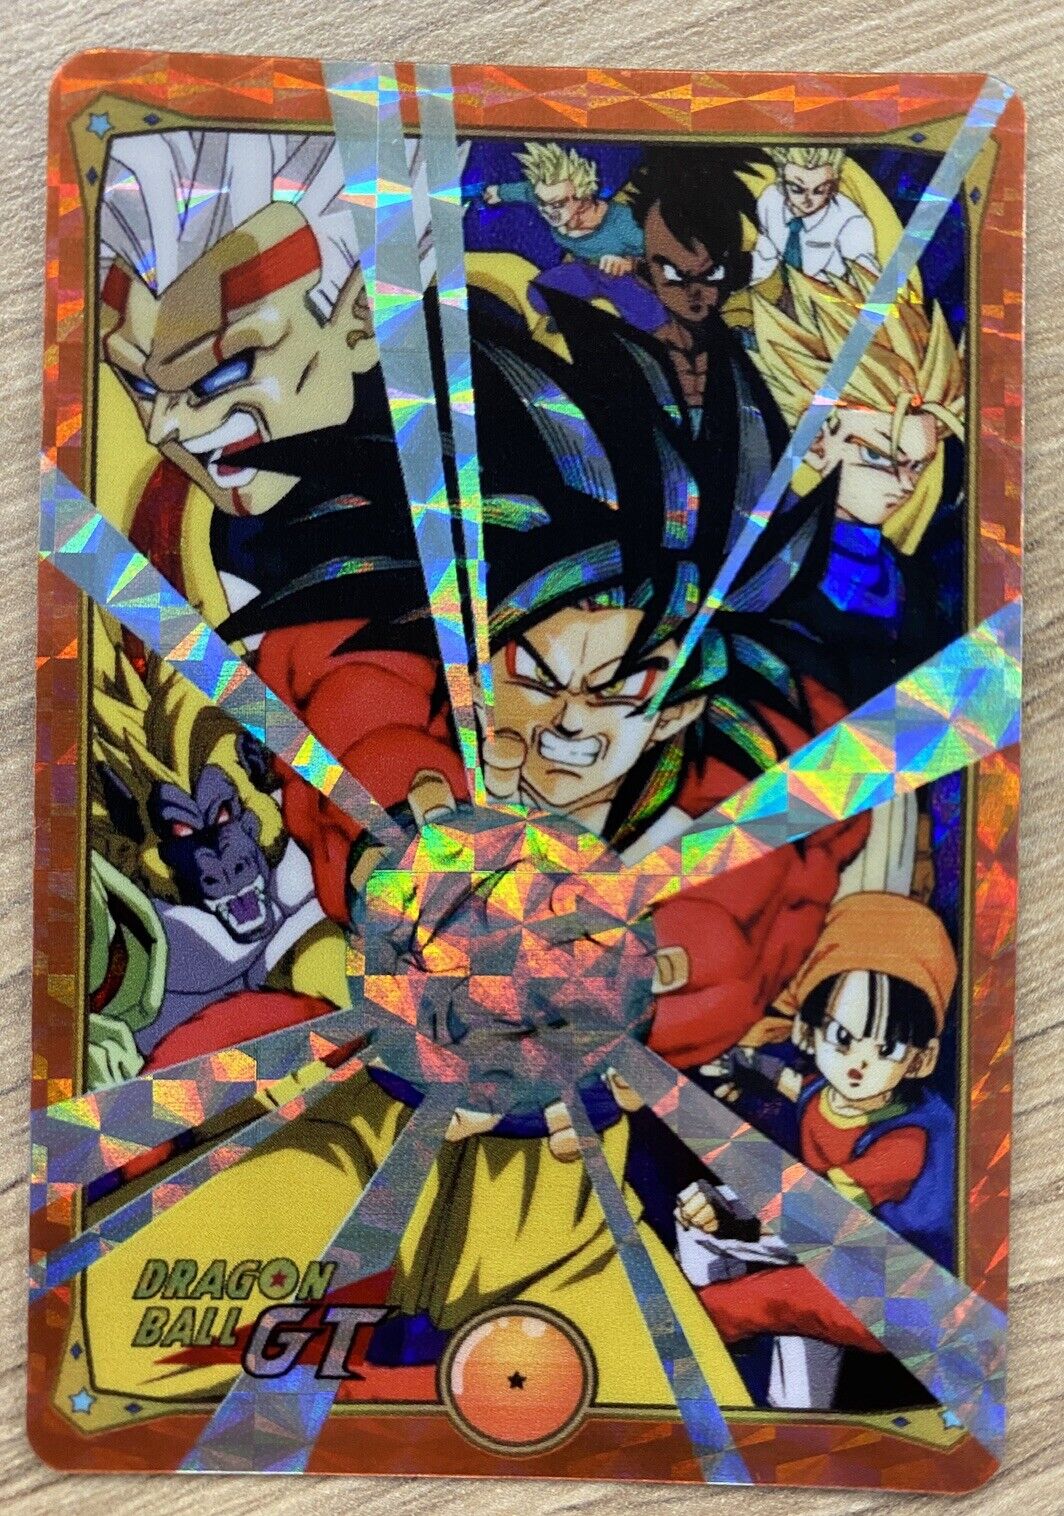 Prism Soft Dragon Ball GT Power Level Songoku 4 Kamehameha Out of Series Card